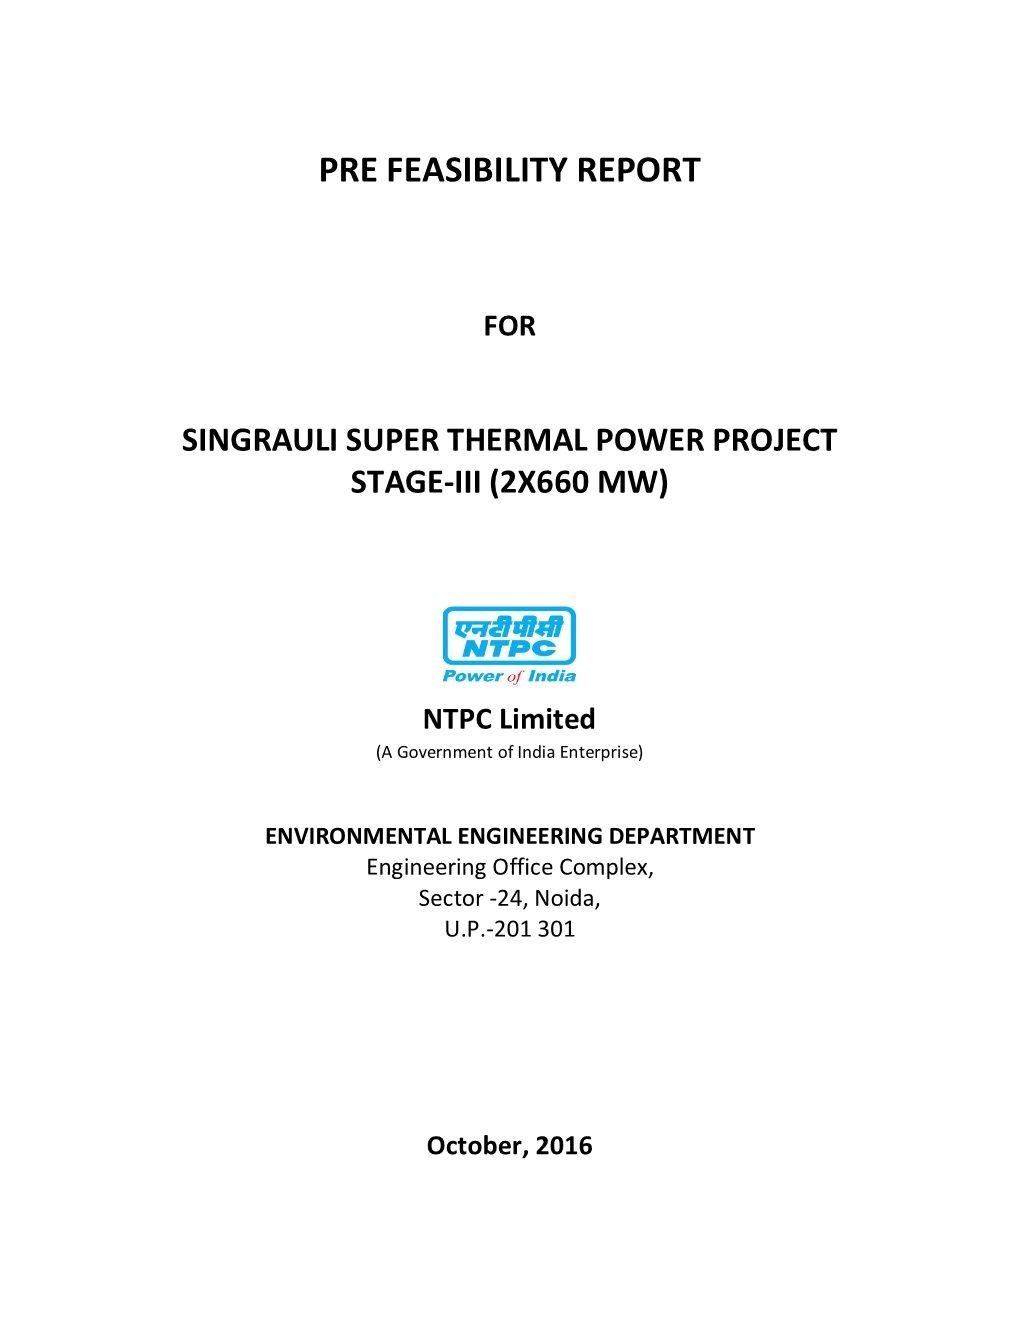 Pre Feasibility Report for Singrauli Super Thermal Power Project Stage-Iii